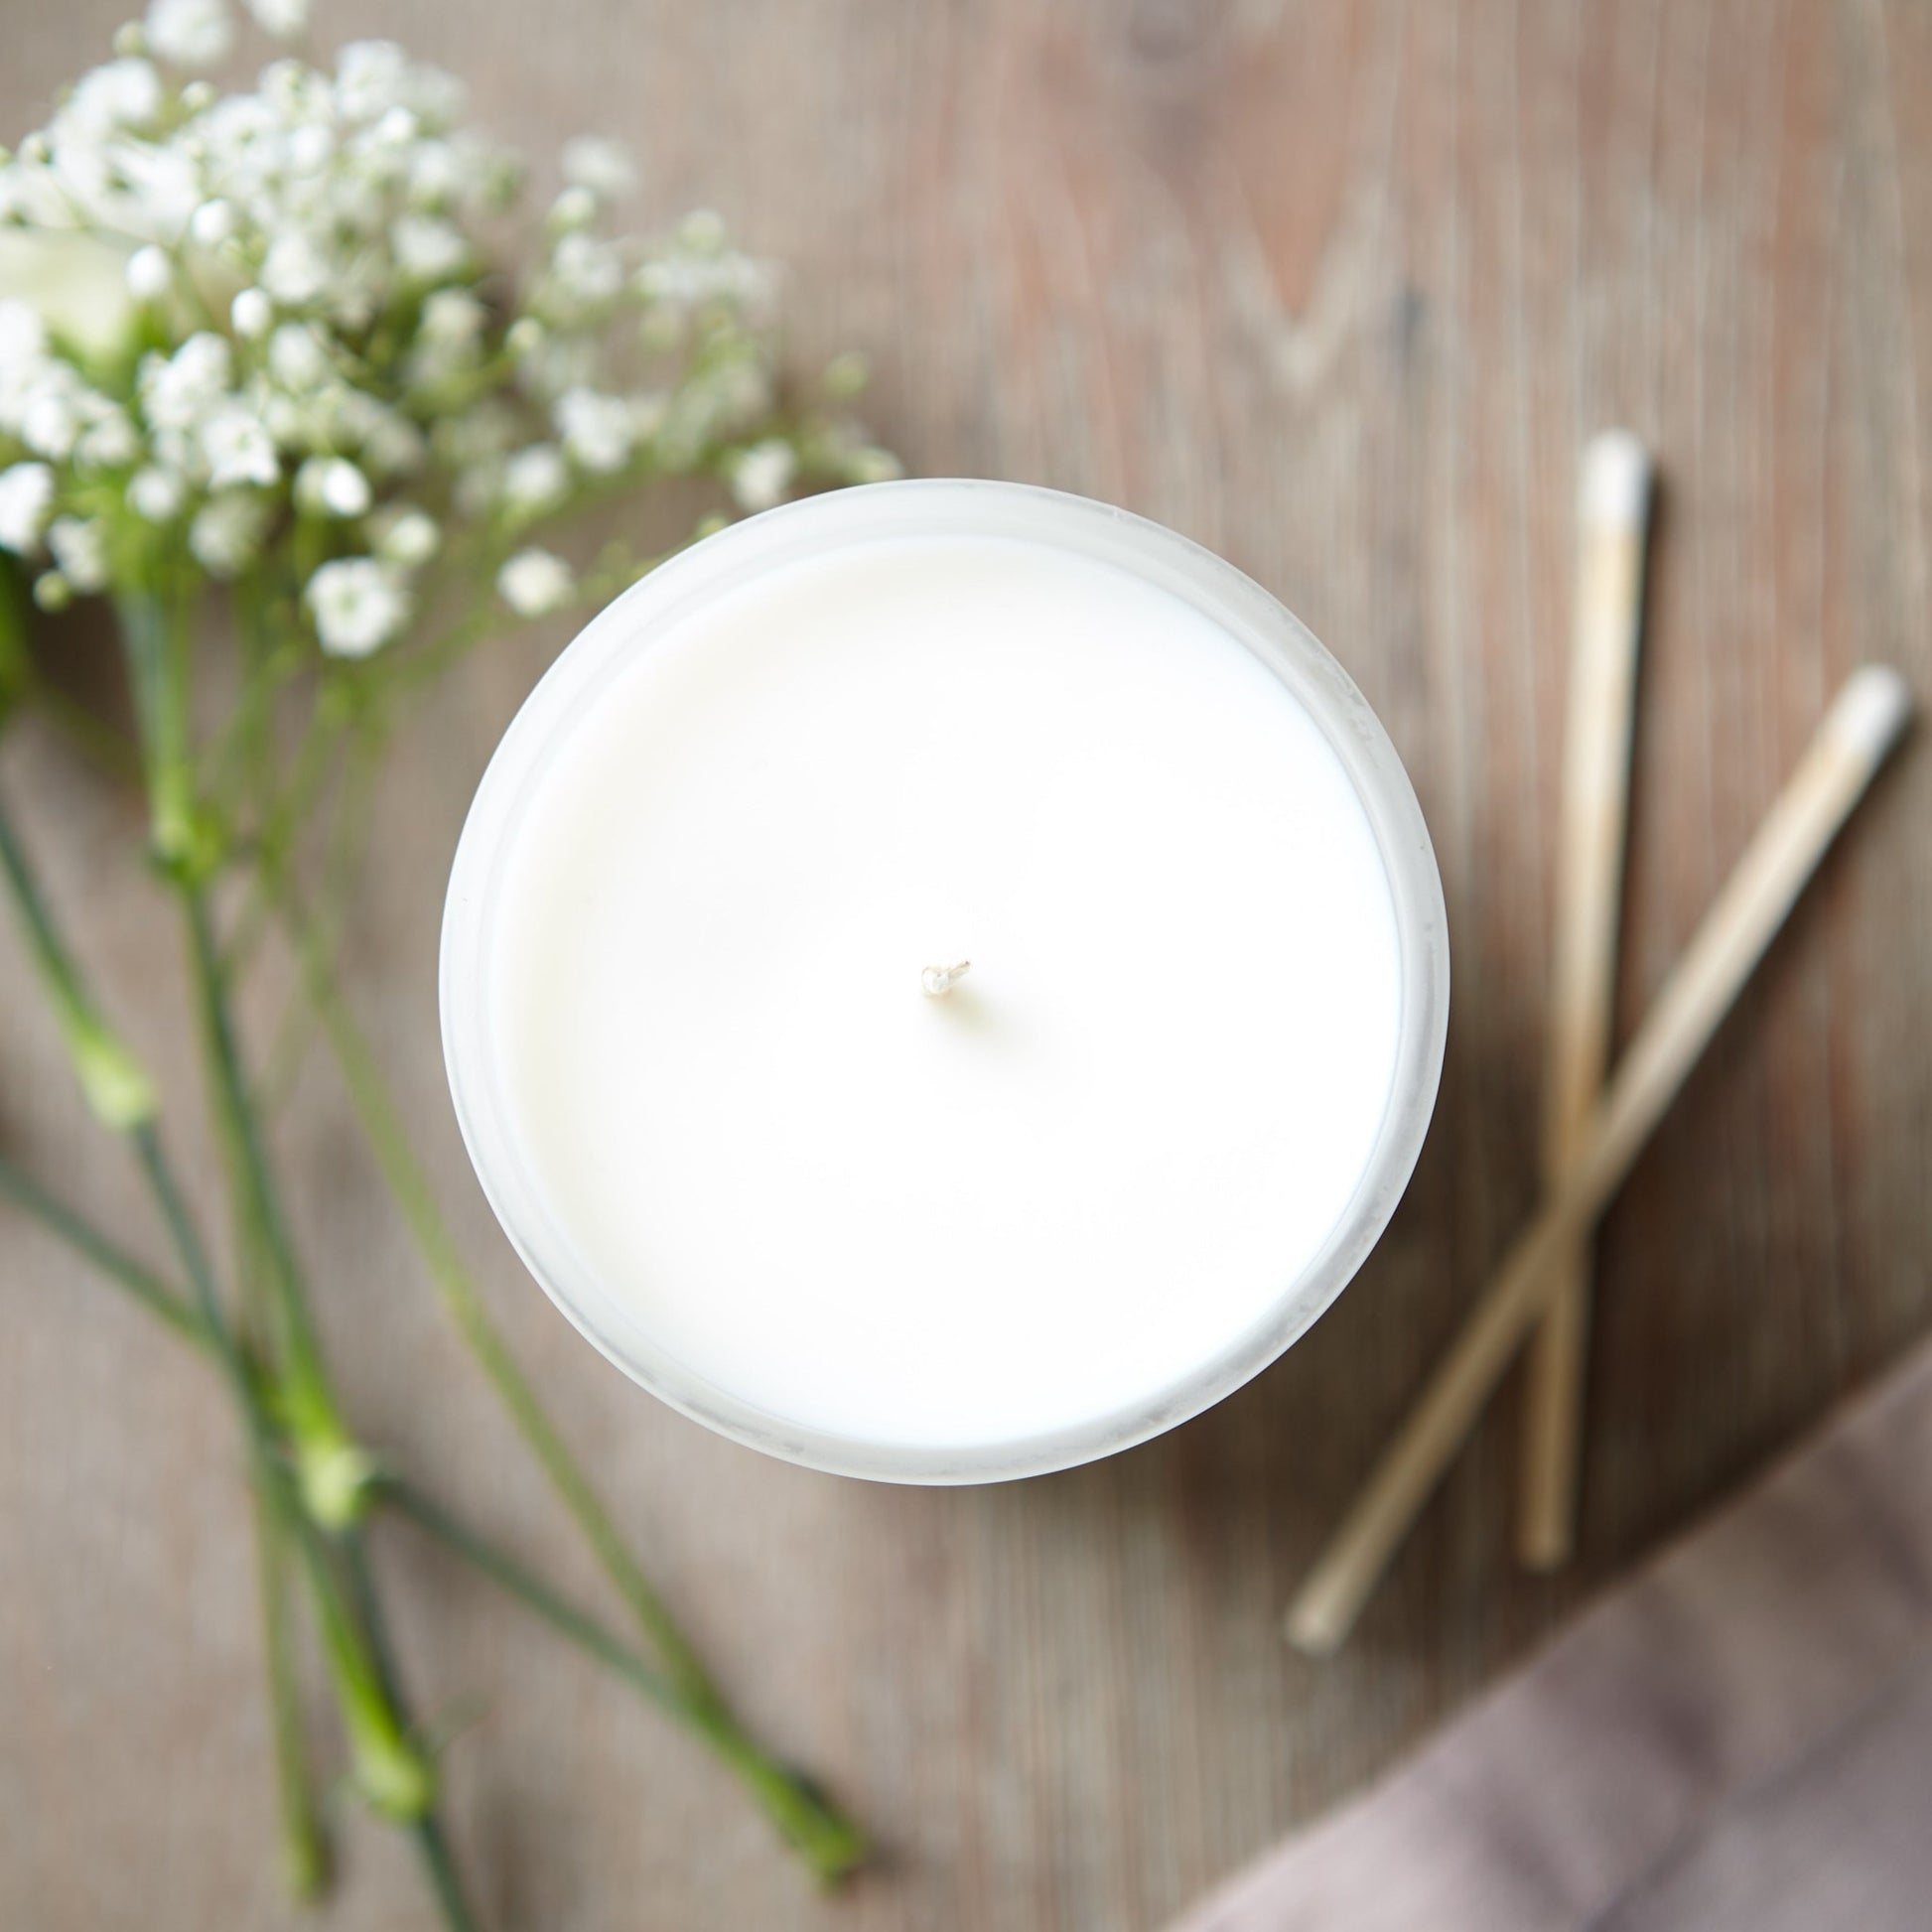 Mum and Dad Gift Christmas Candle Botanical - Kindred Fires